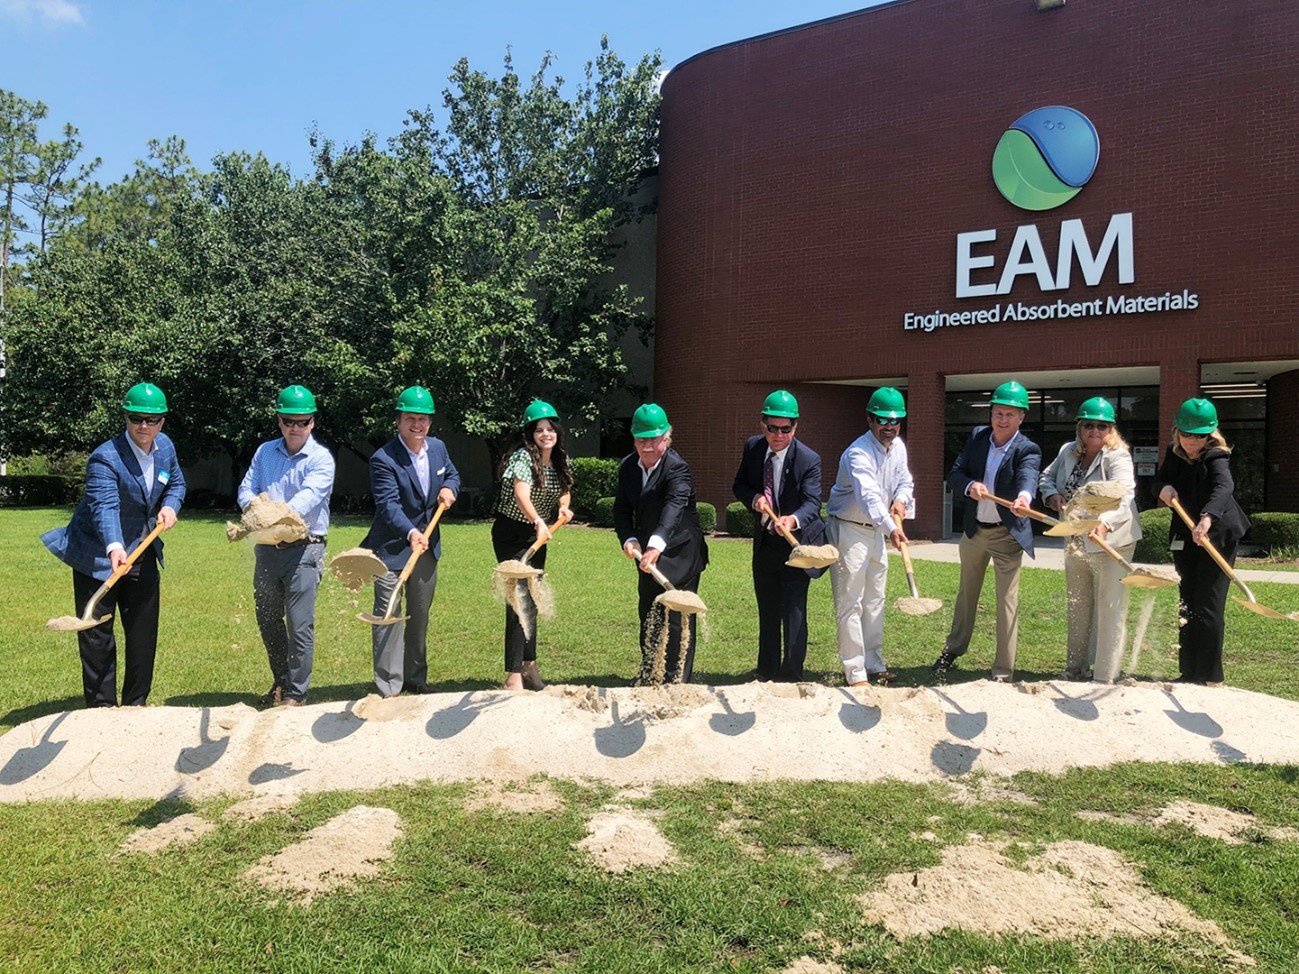 The expansion at EAM, a wholly owned subsidiary of Domtar, will bring 75 new jobs to the facility when it’s complete in 2022